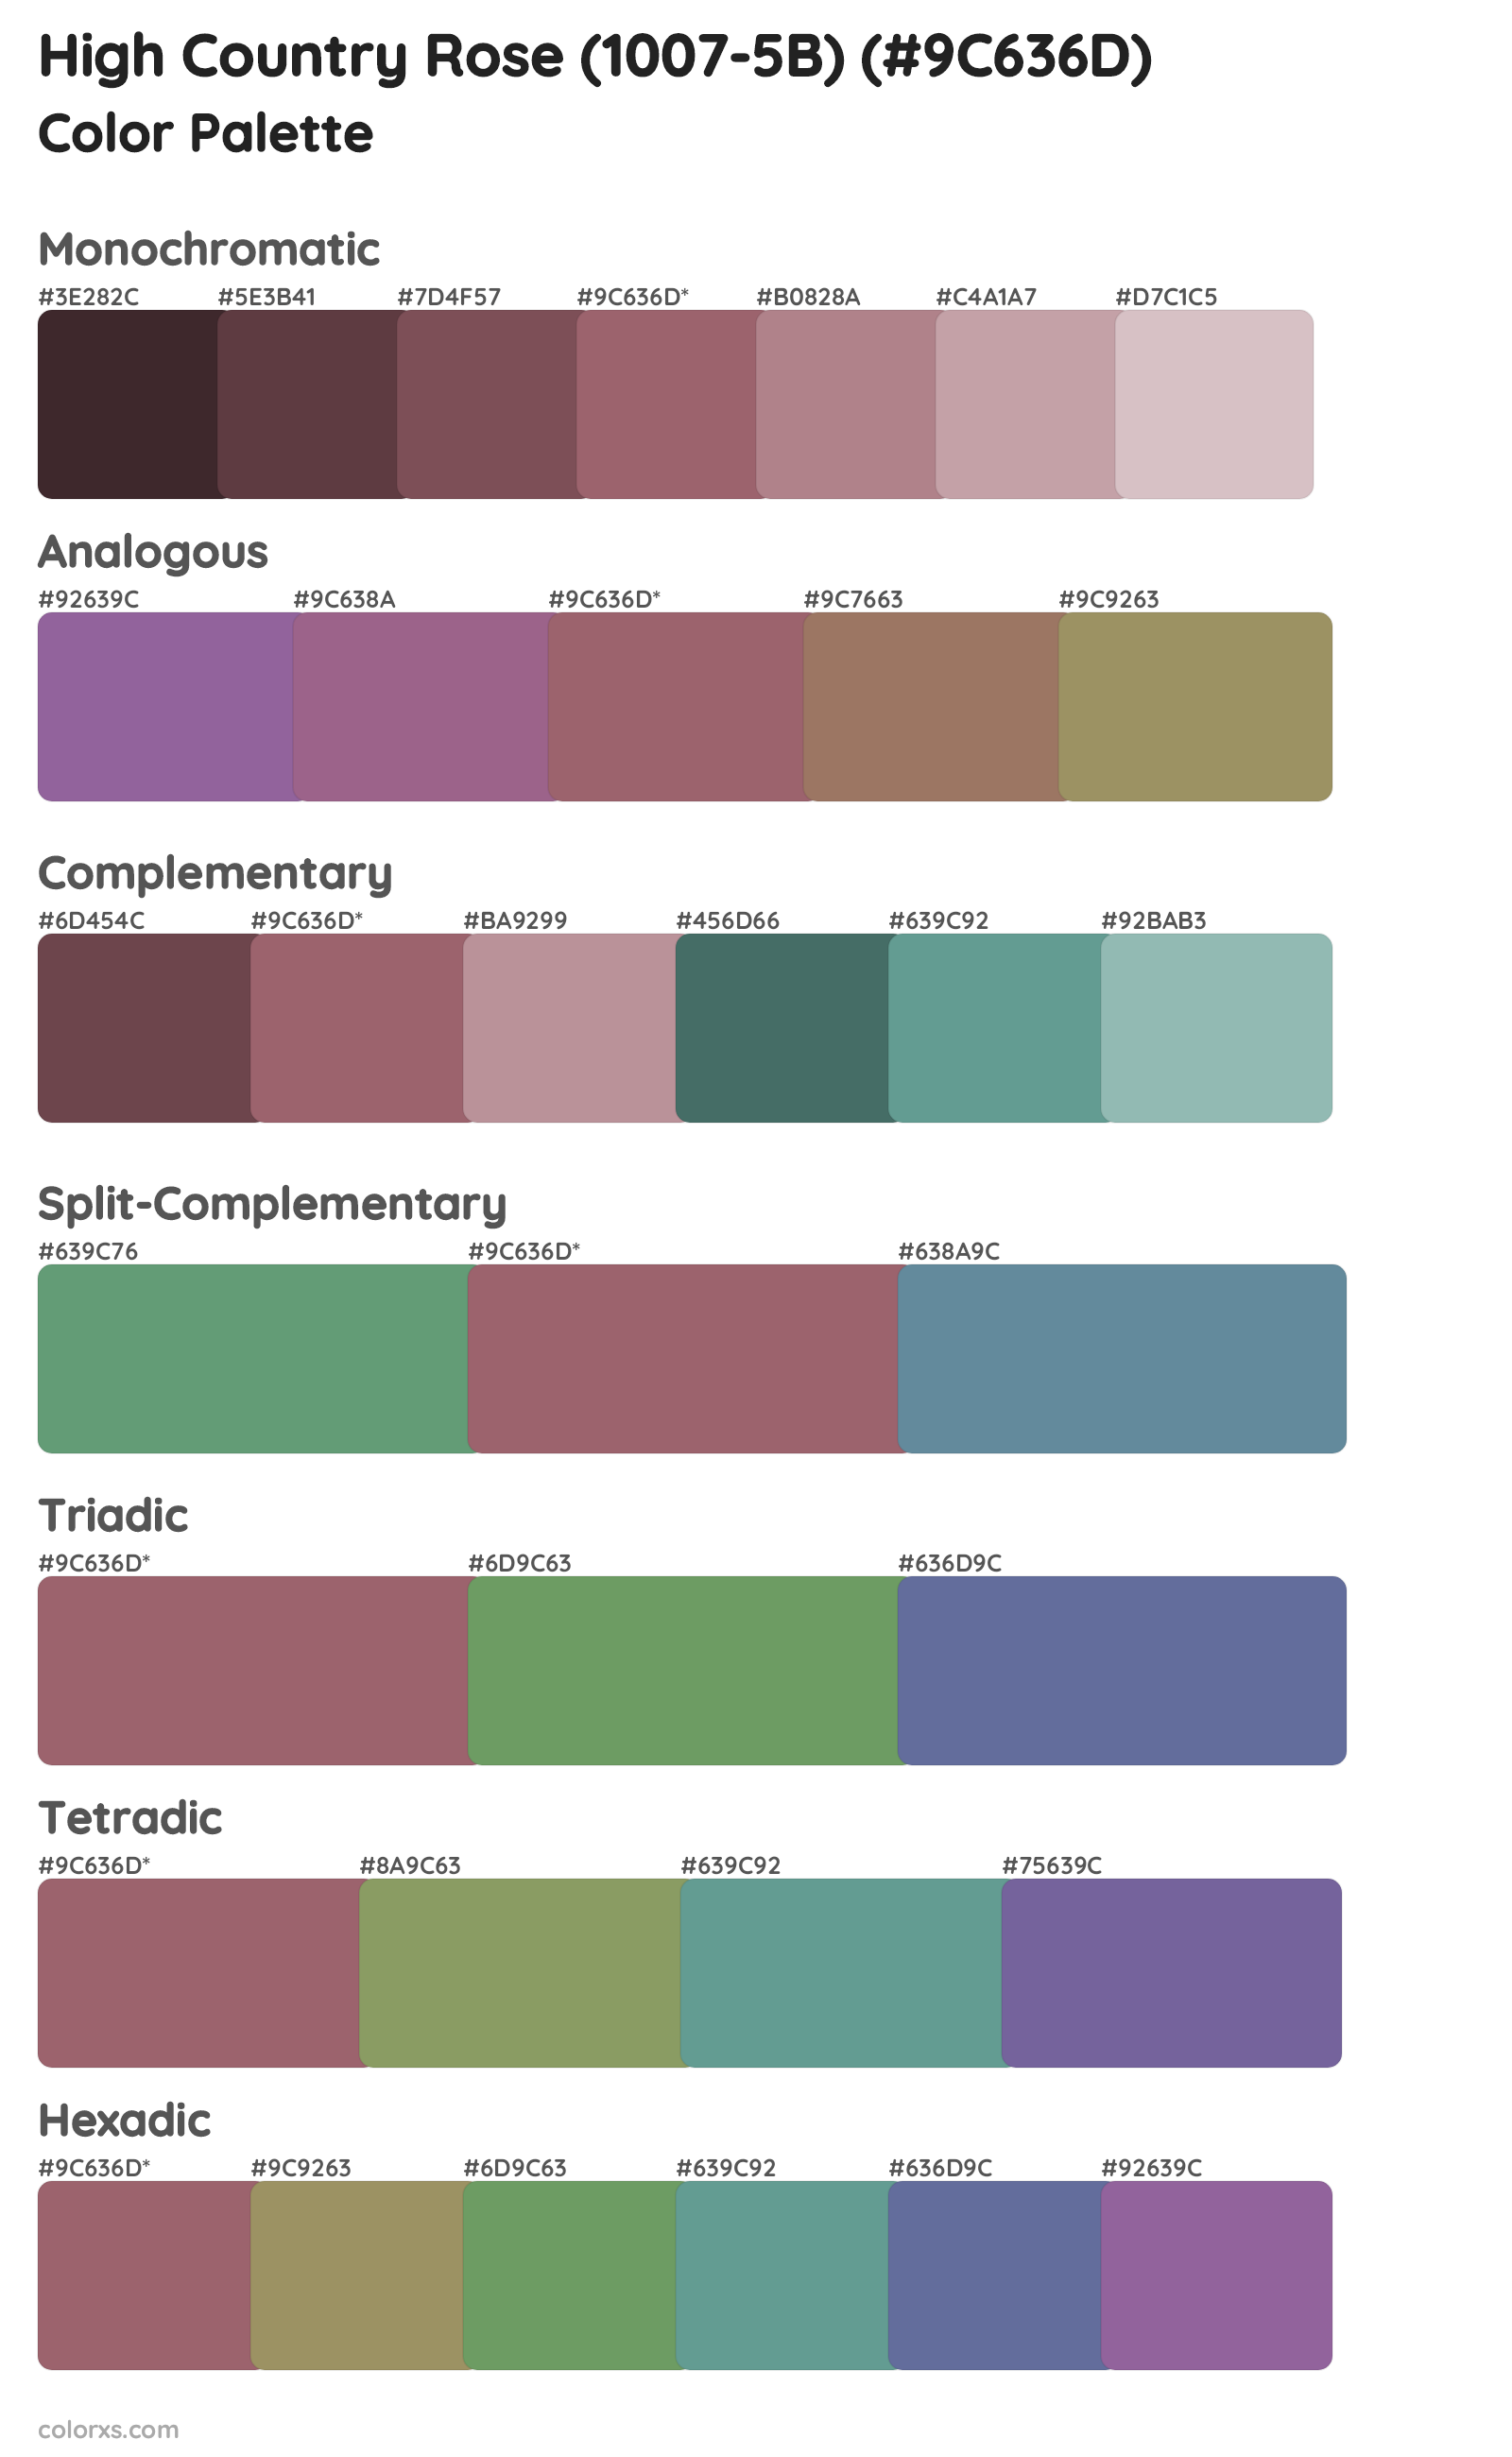 High Country Rose (1007-5B) Color Scheme Palettes